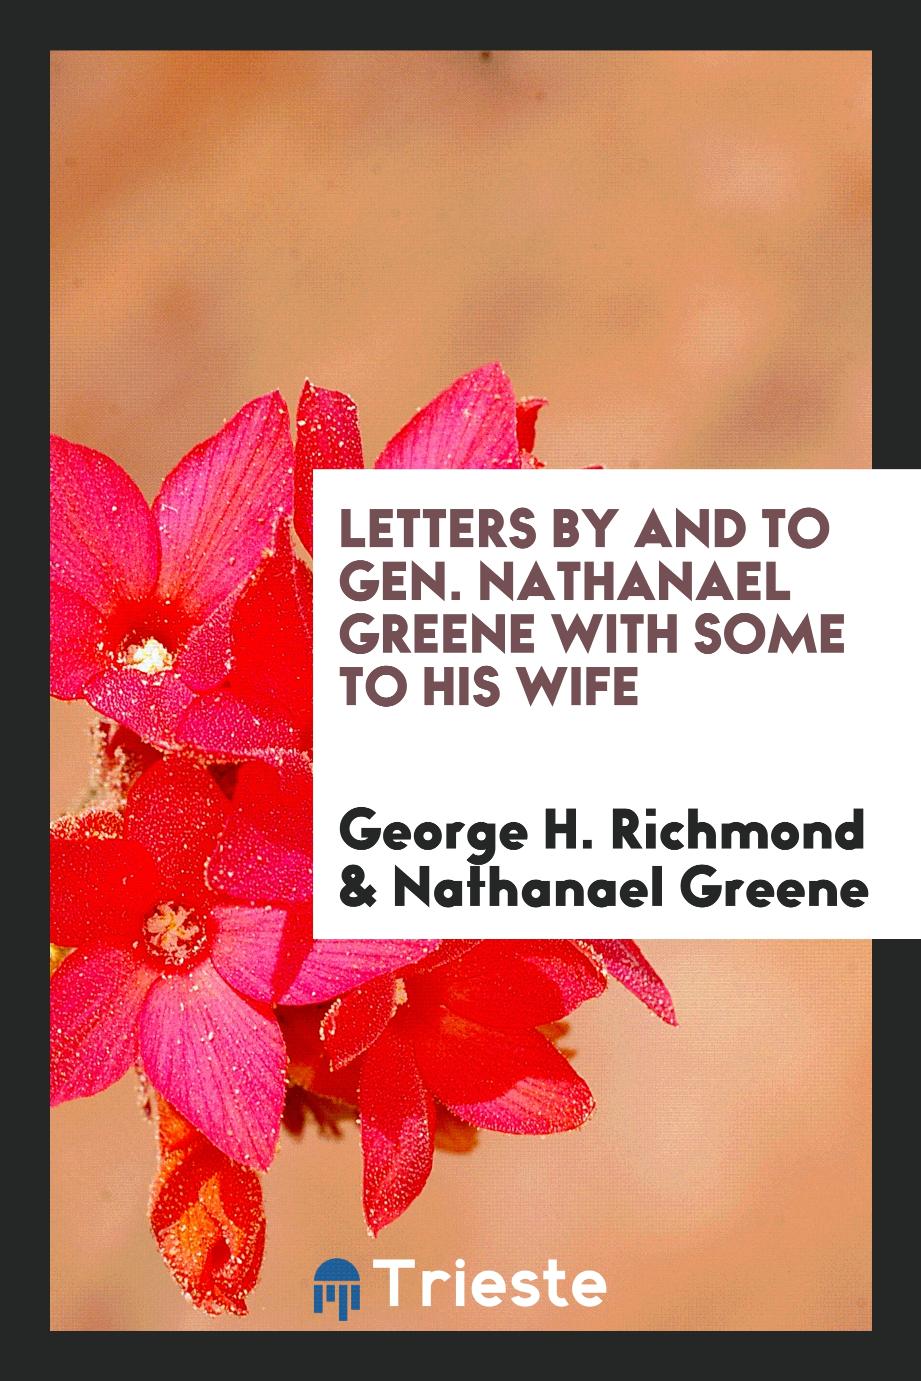 Letters by and to Gen. Nathanael Greene with some to his wife